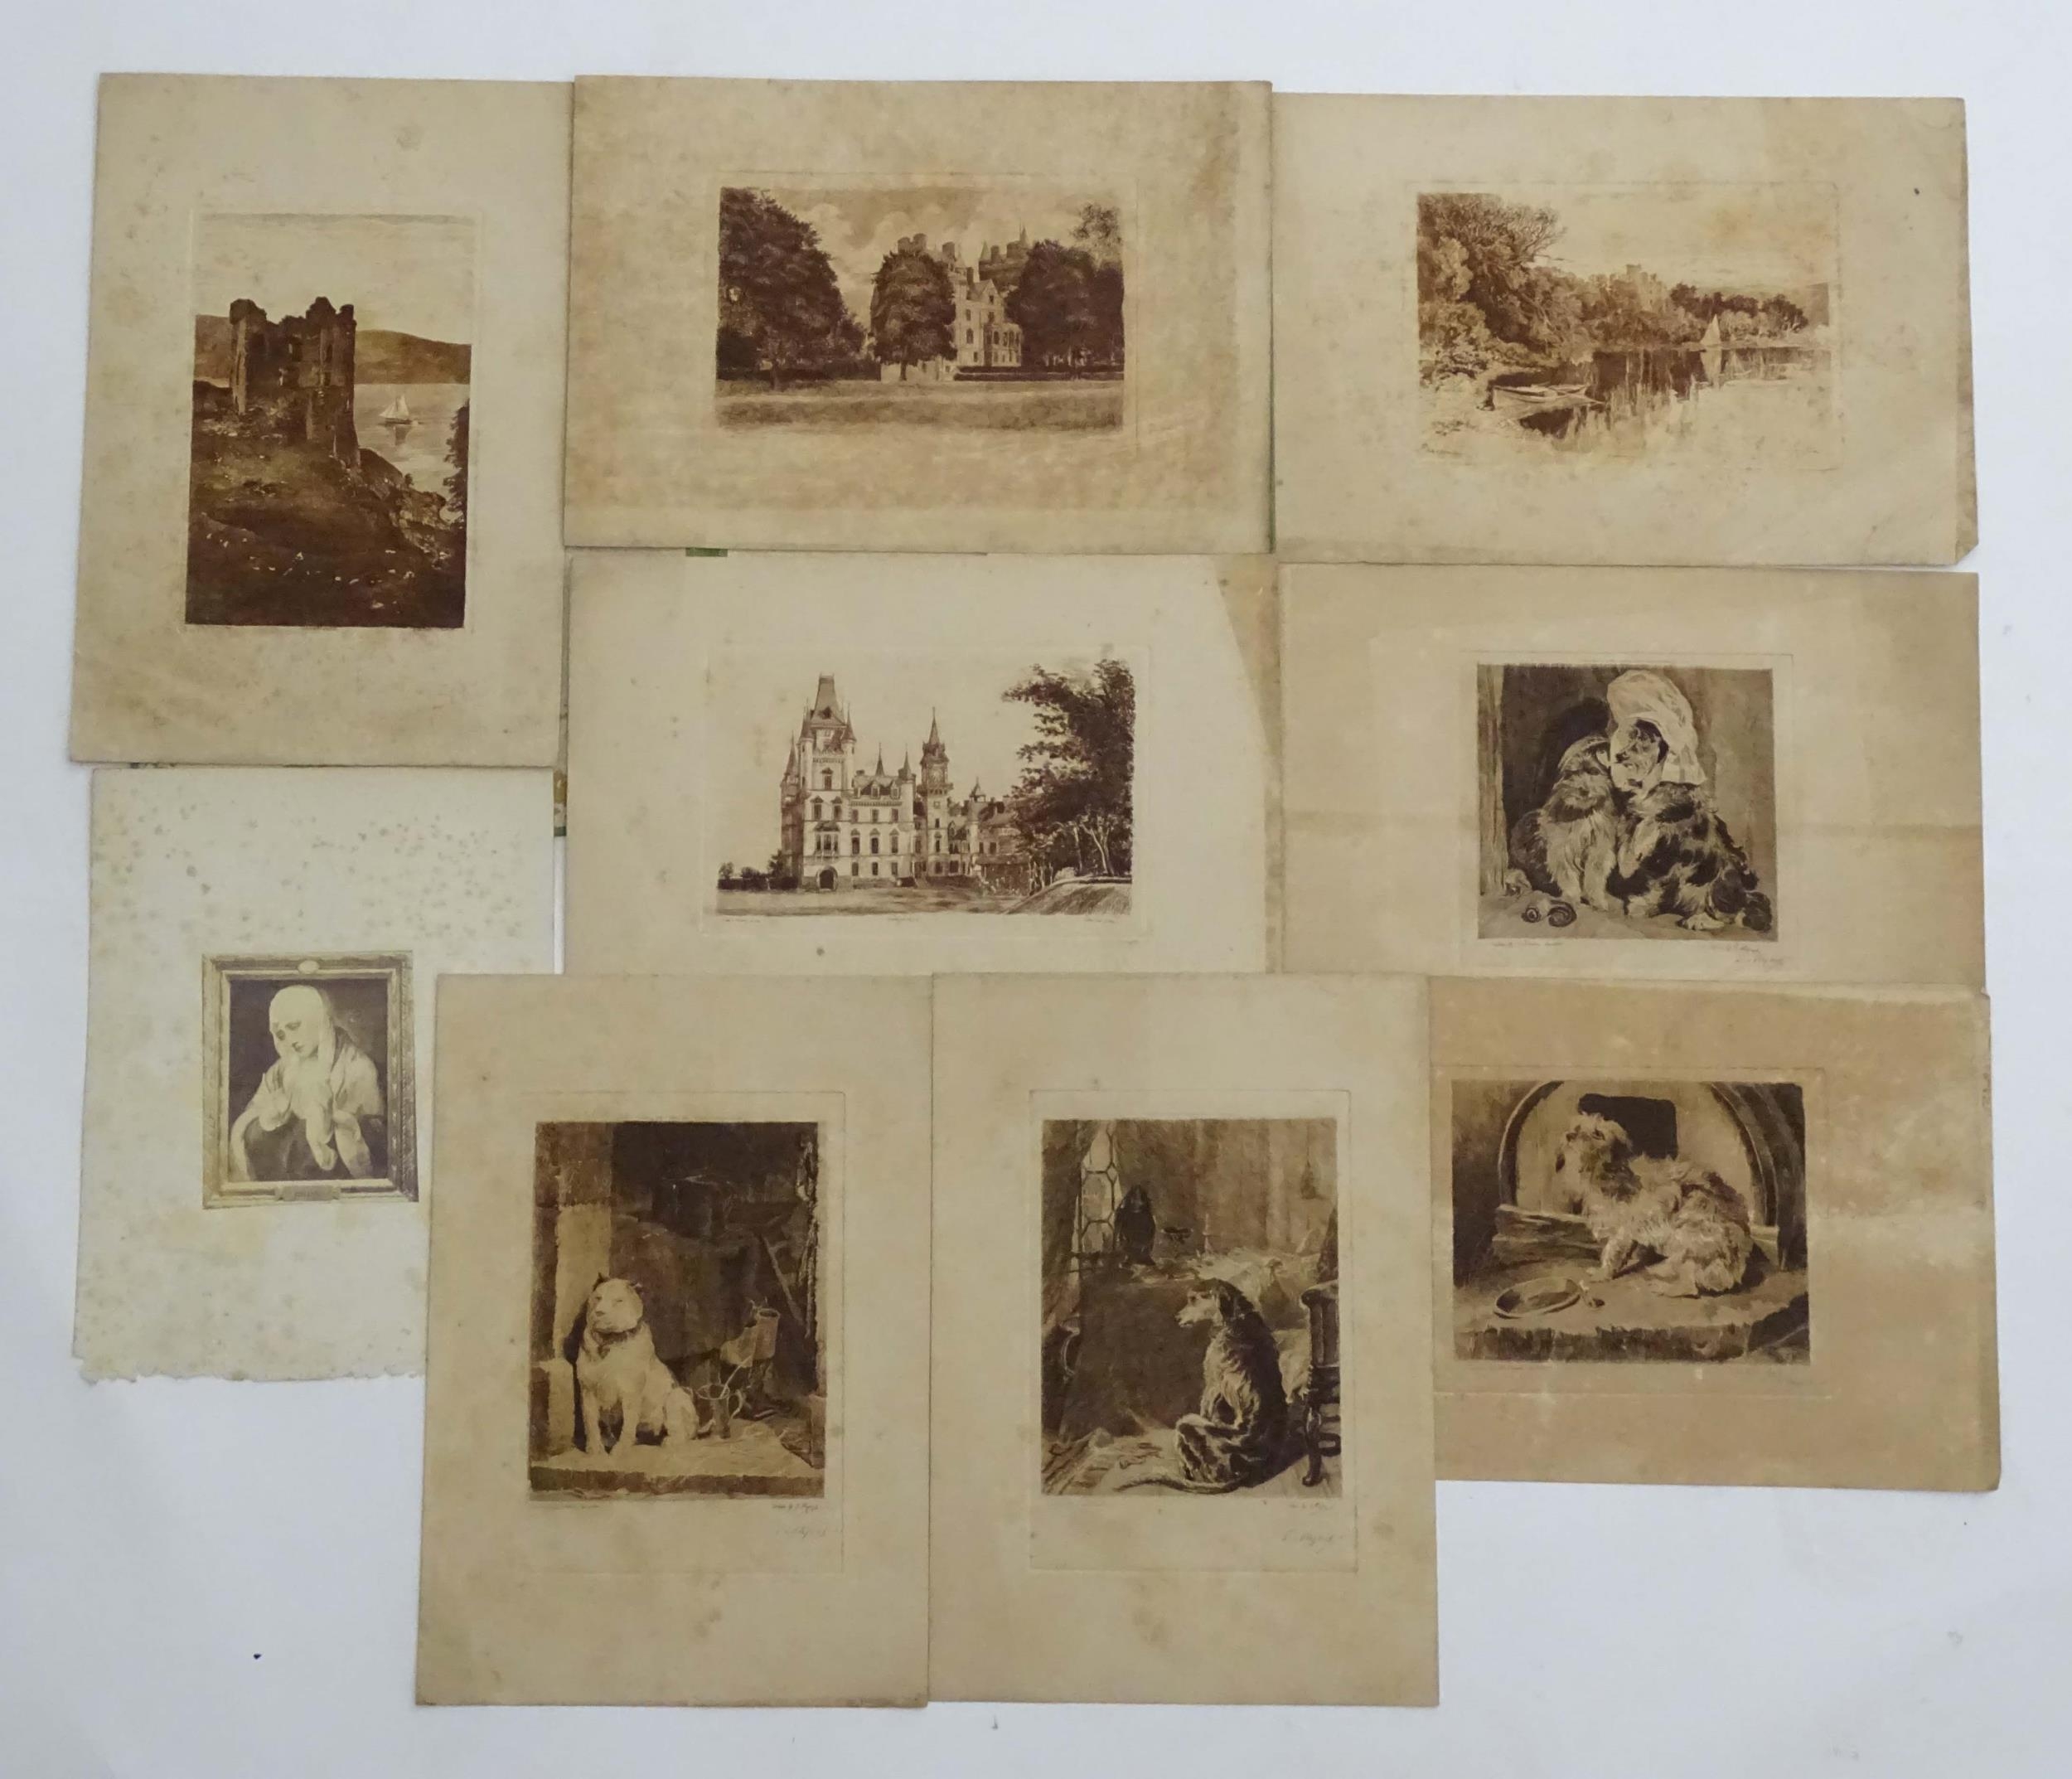 S. Myers after Sir Edwin Henry Landseer (1807-1873), 19th century, Four etchings depicting dogs to - Image 7 of 20